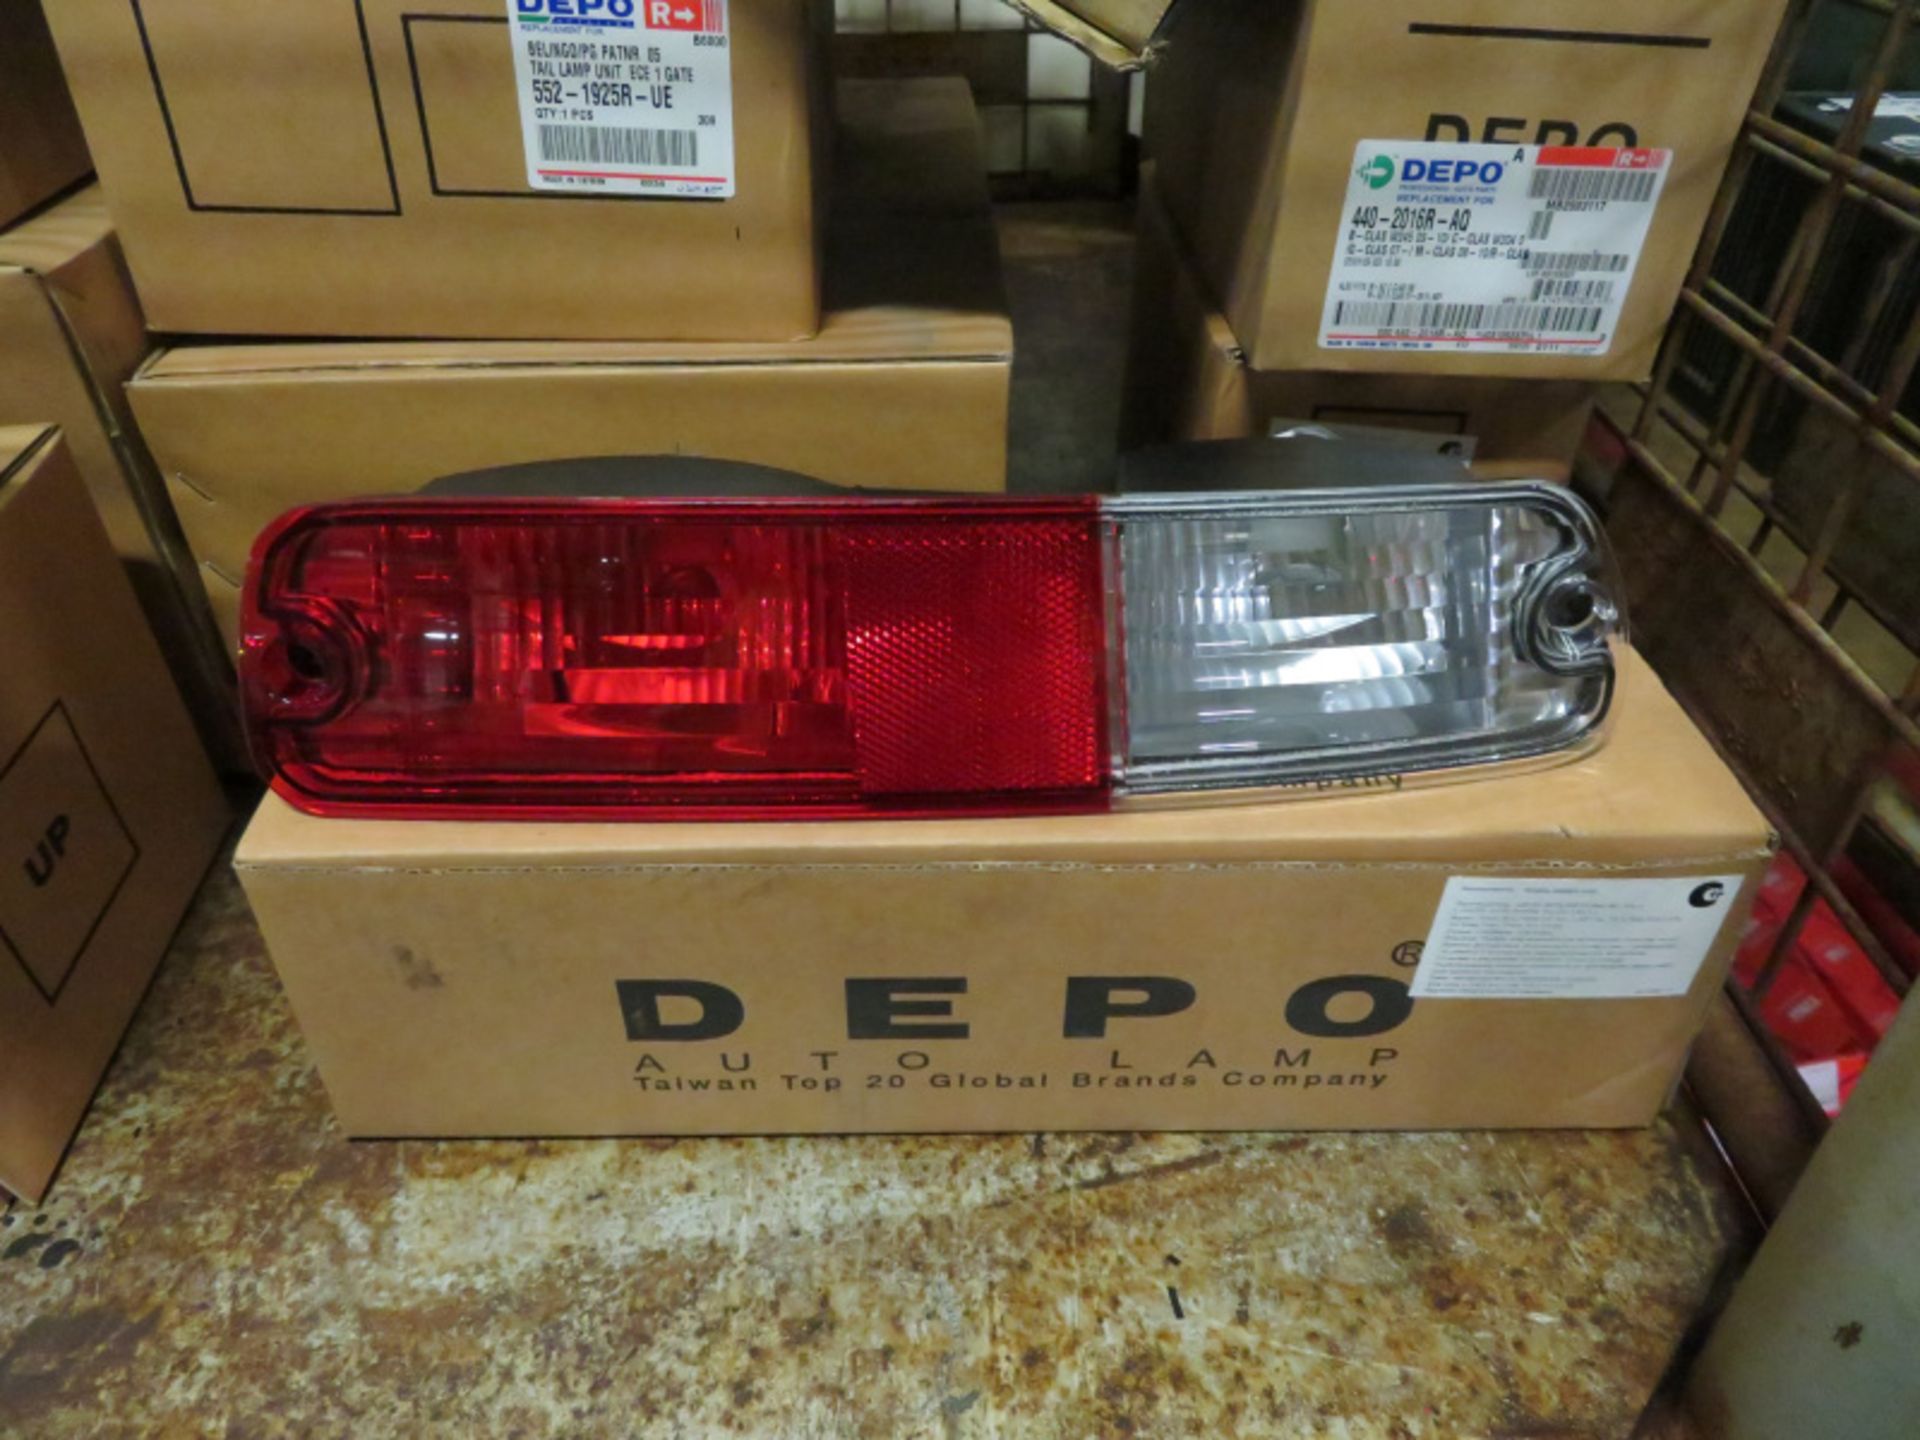 Vehicle parts - Depo, Lucas - see pictures for models and types - Image 2 of 8